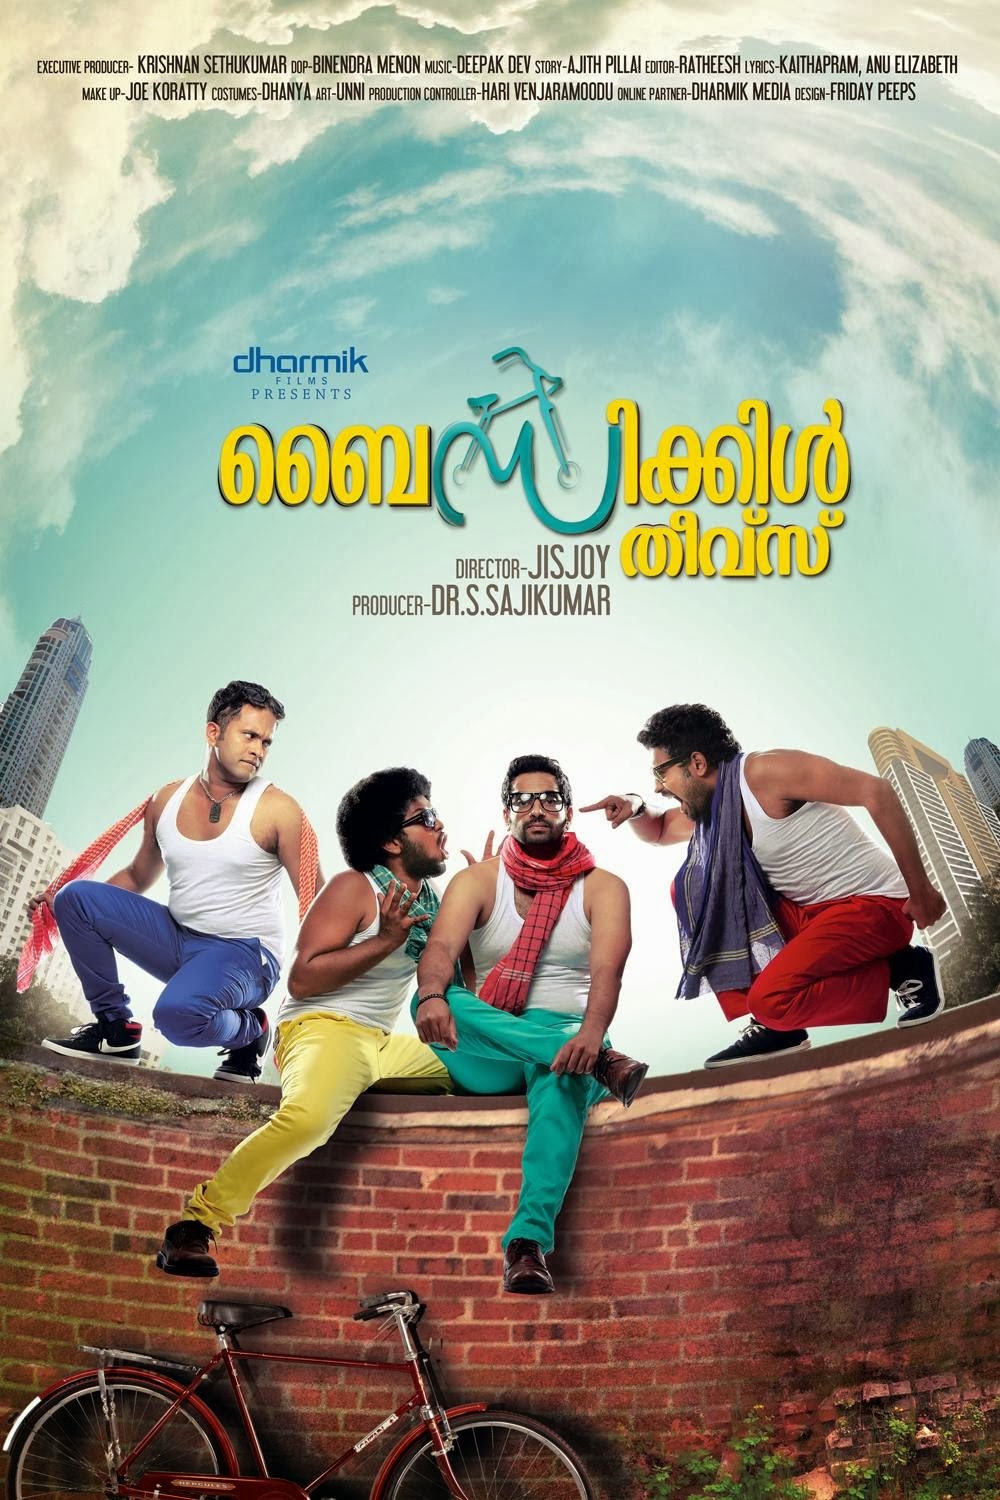 bicycle thieves malayalam film mp3 songs free download